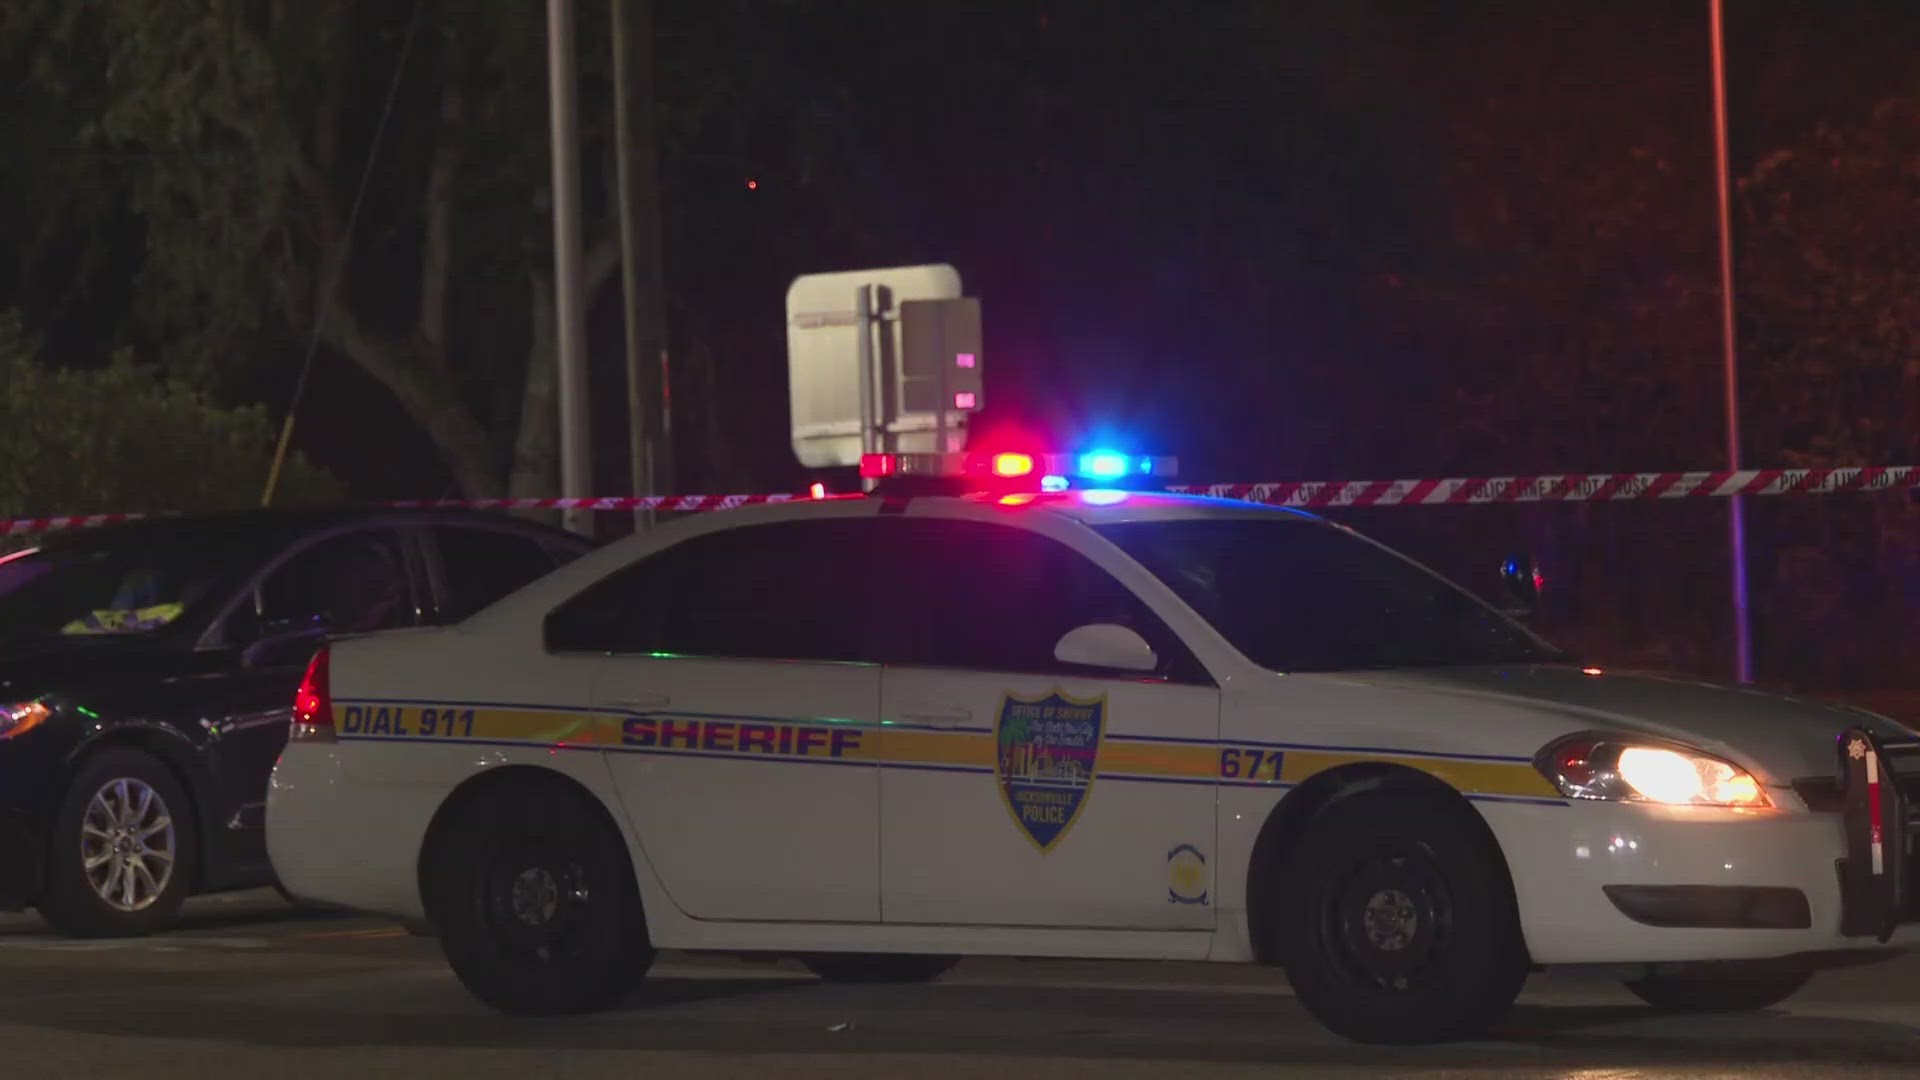 The Jacksonville Sheriff's Office says around 1:30 a.m. Saturday, officers responded to calls of gunfire on Bowden Road, just east of Interstate 95.